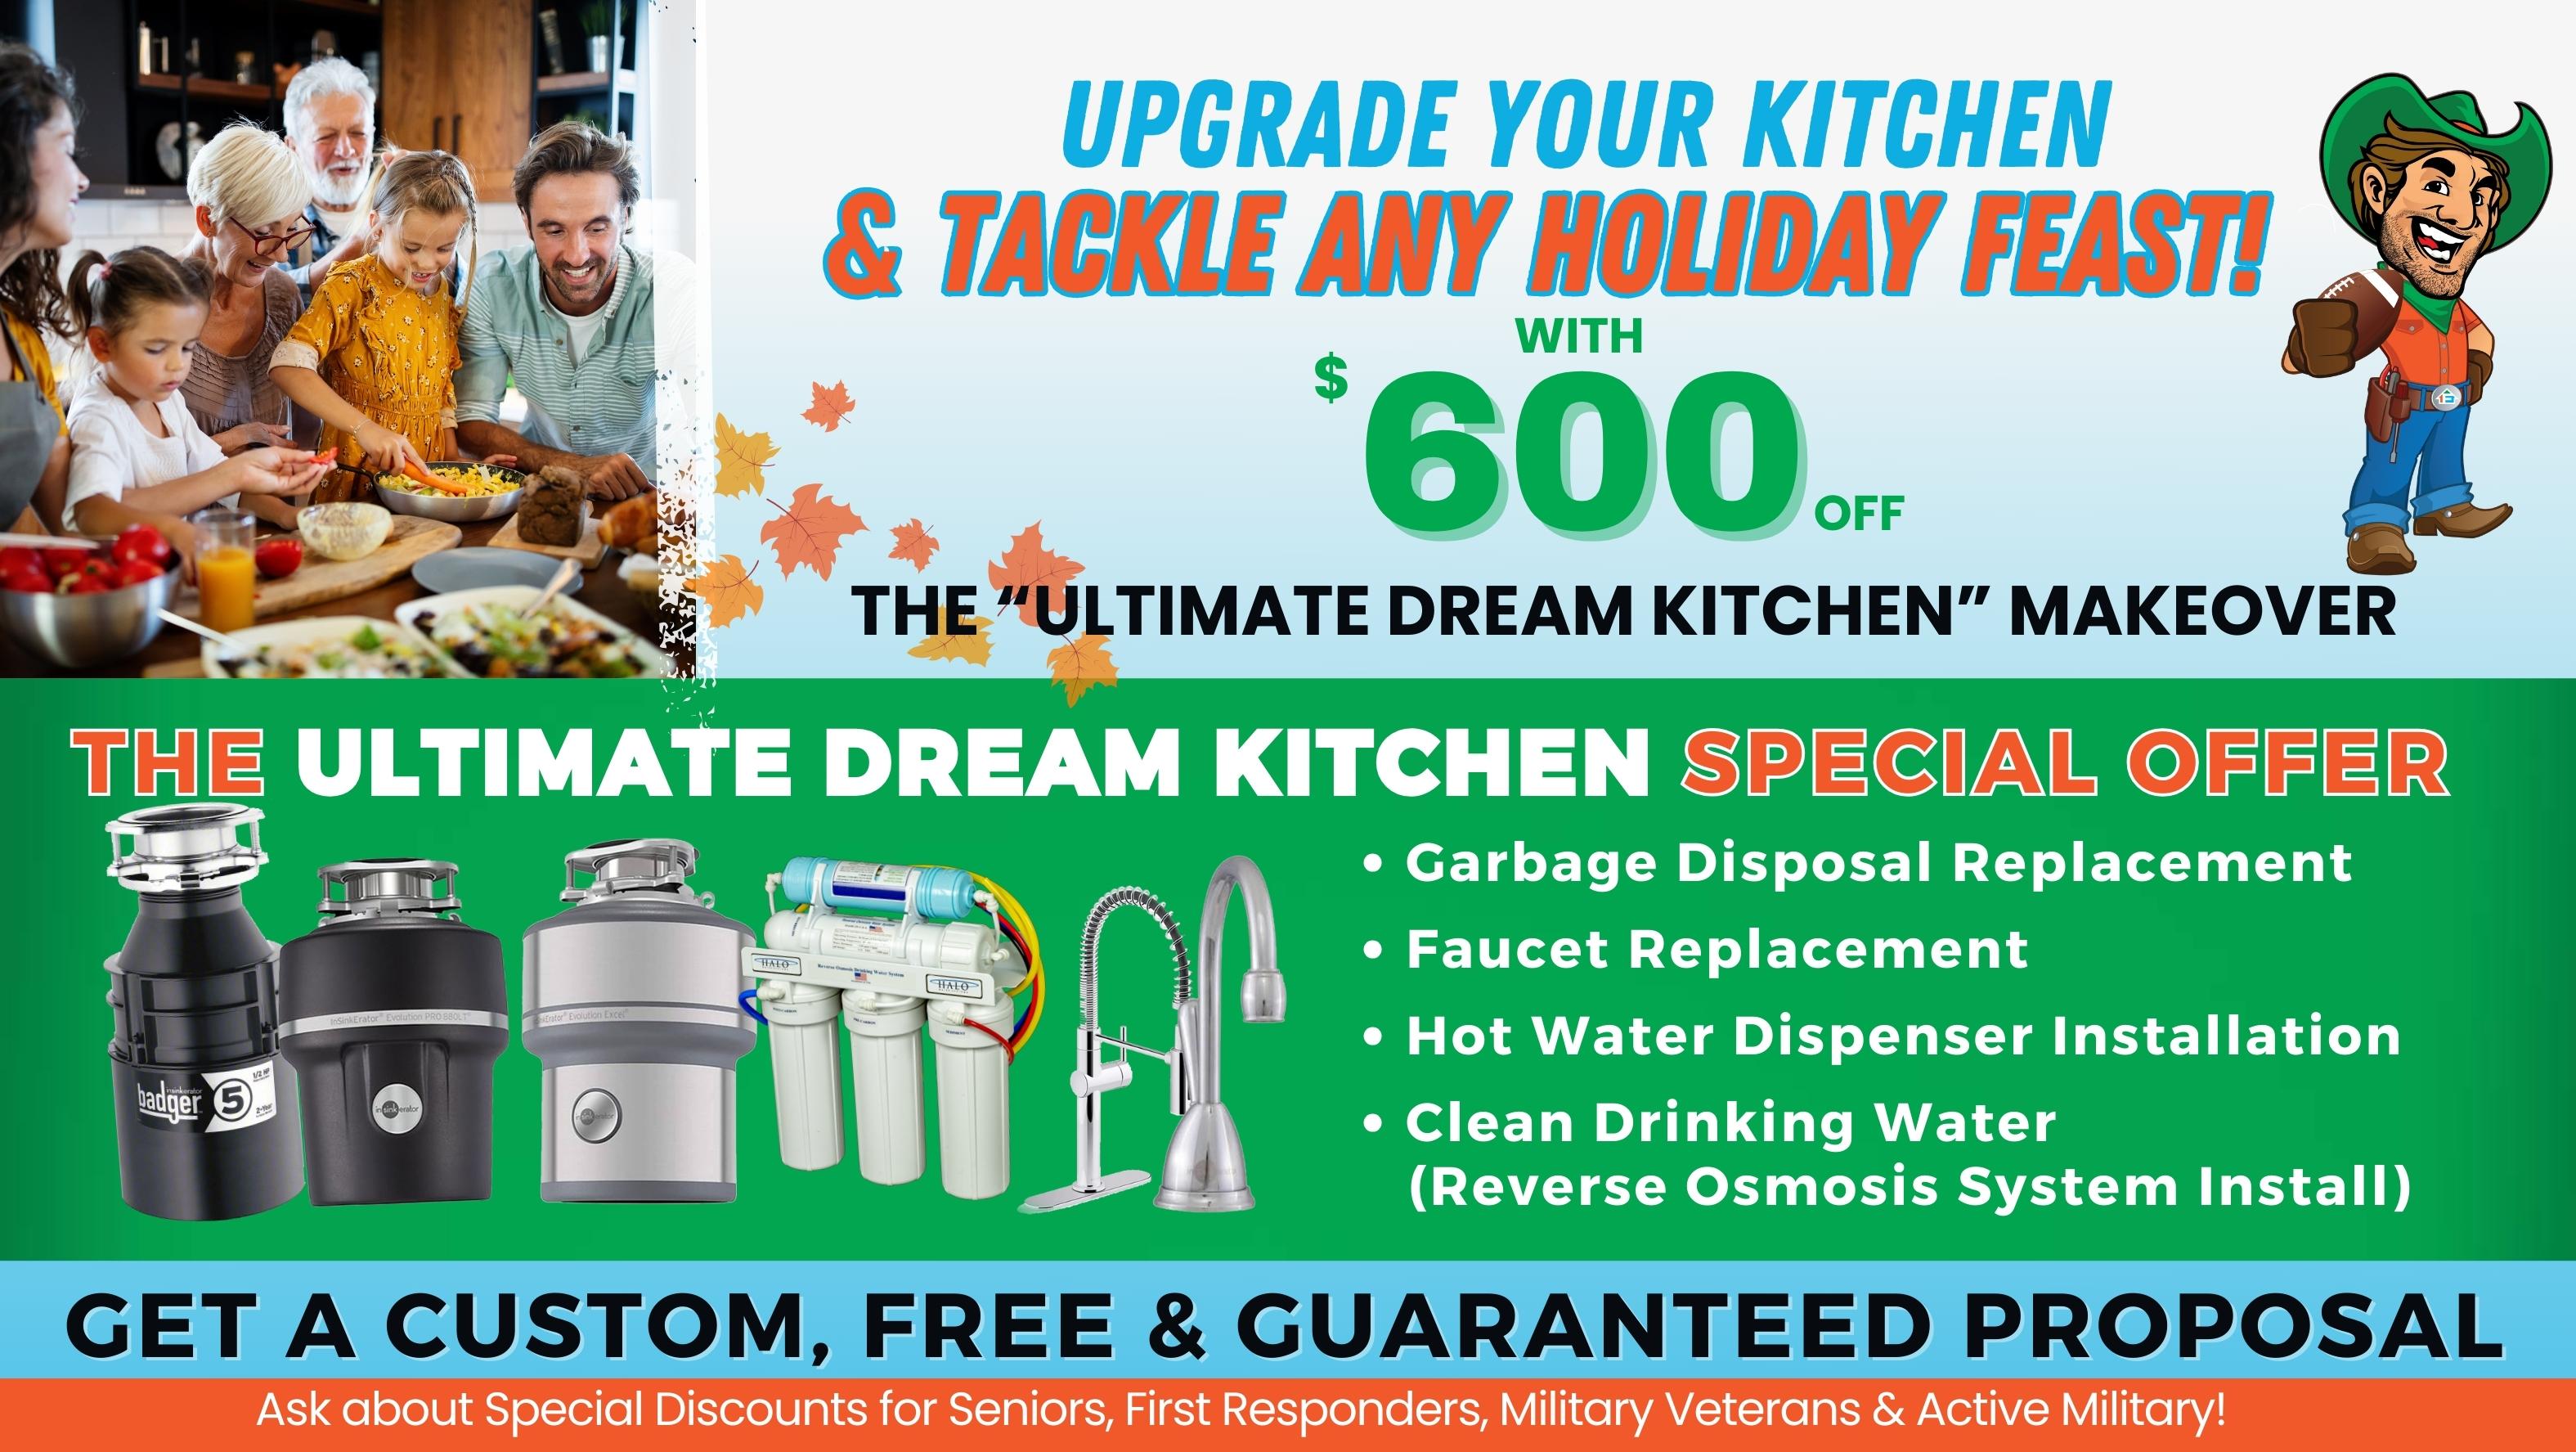 The Ultimate Dream Kitchen Special Offer